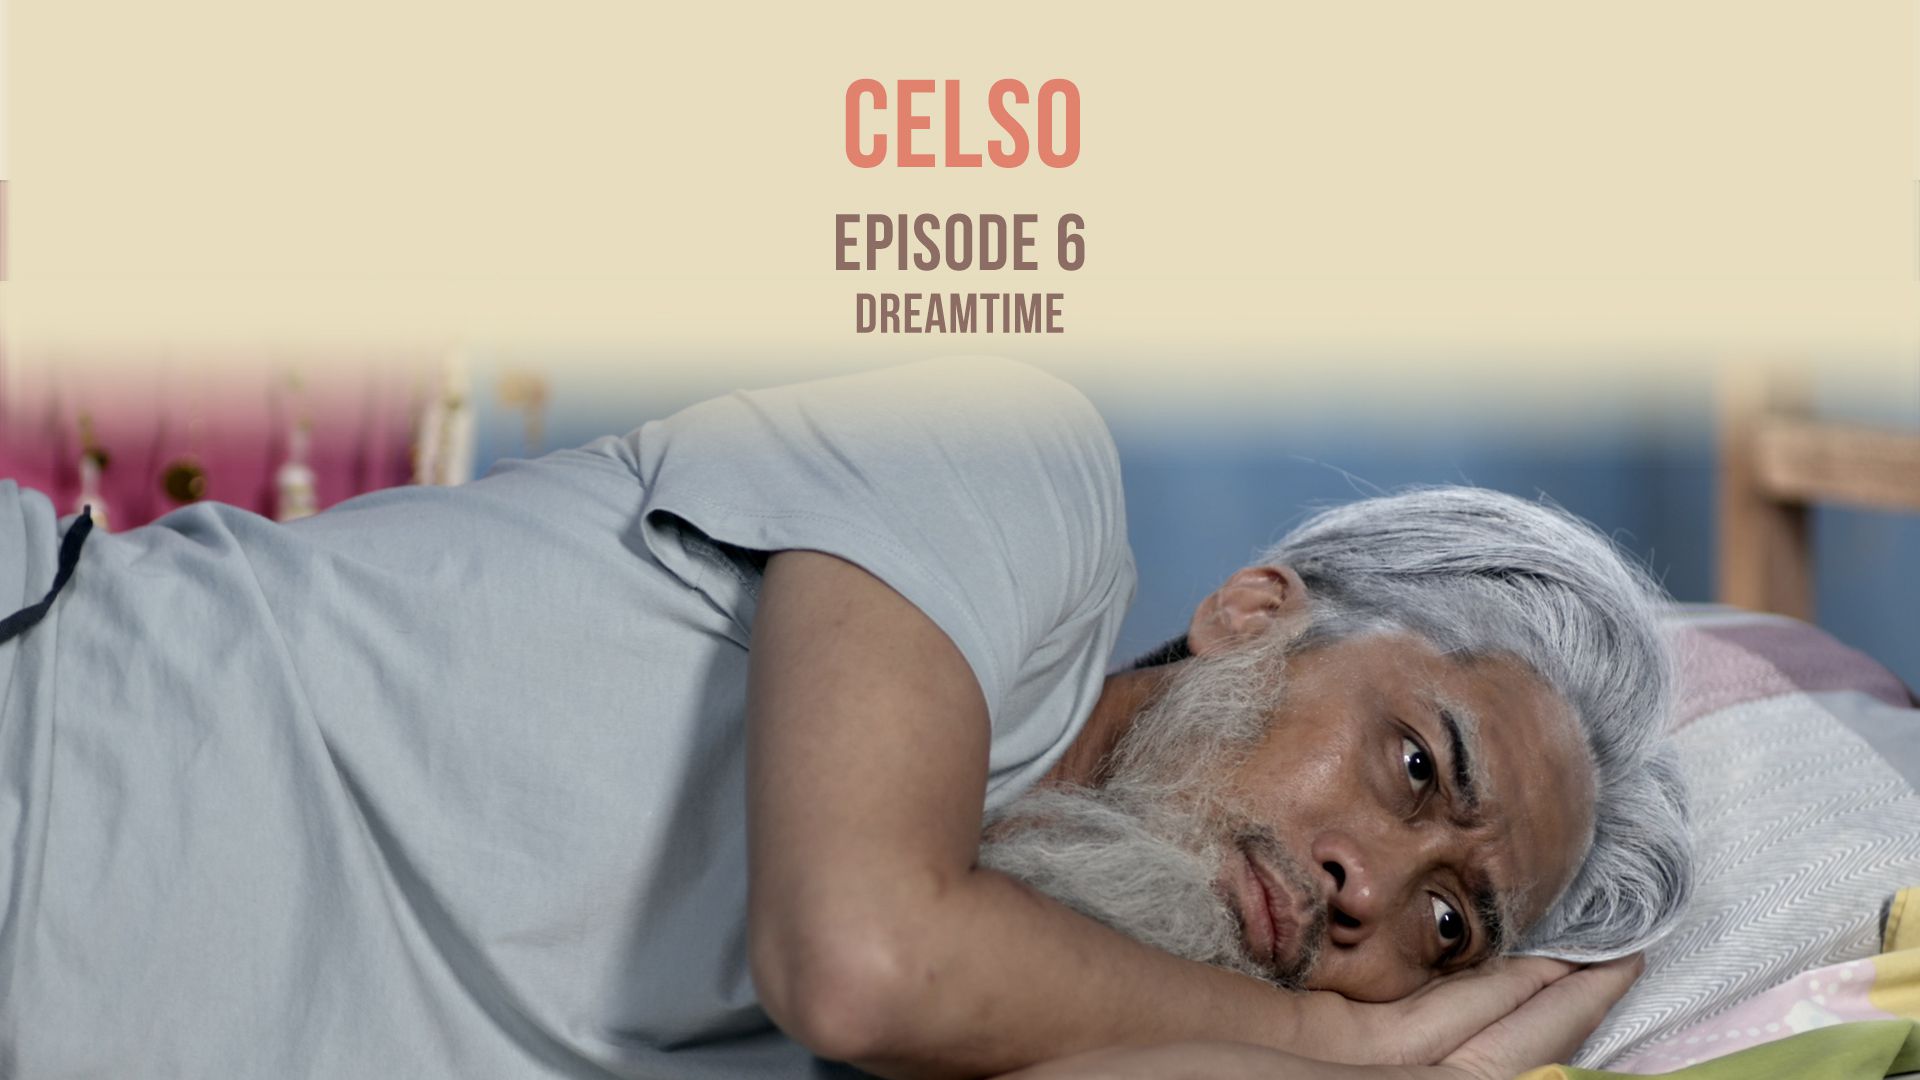 CELSO Episode 6